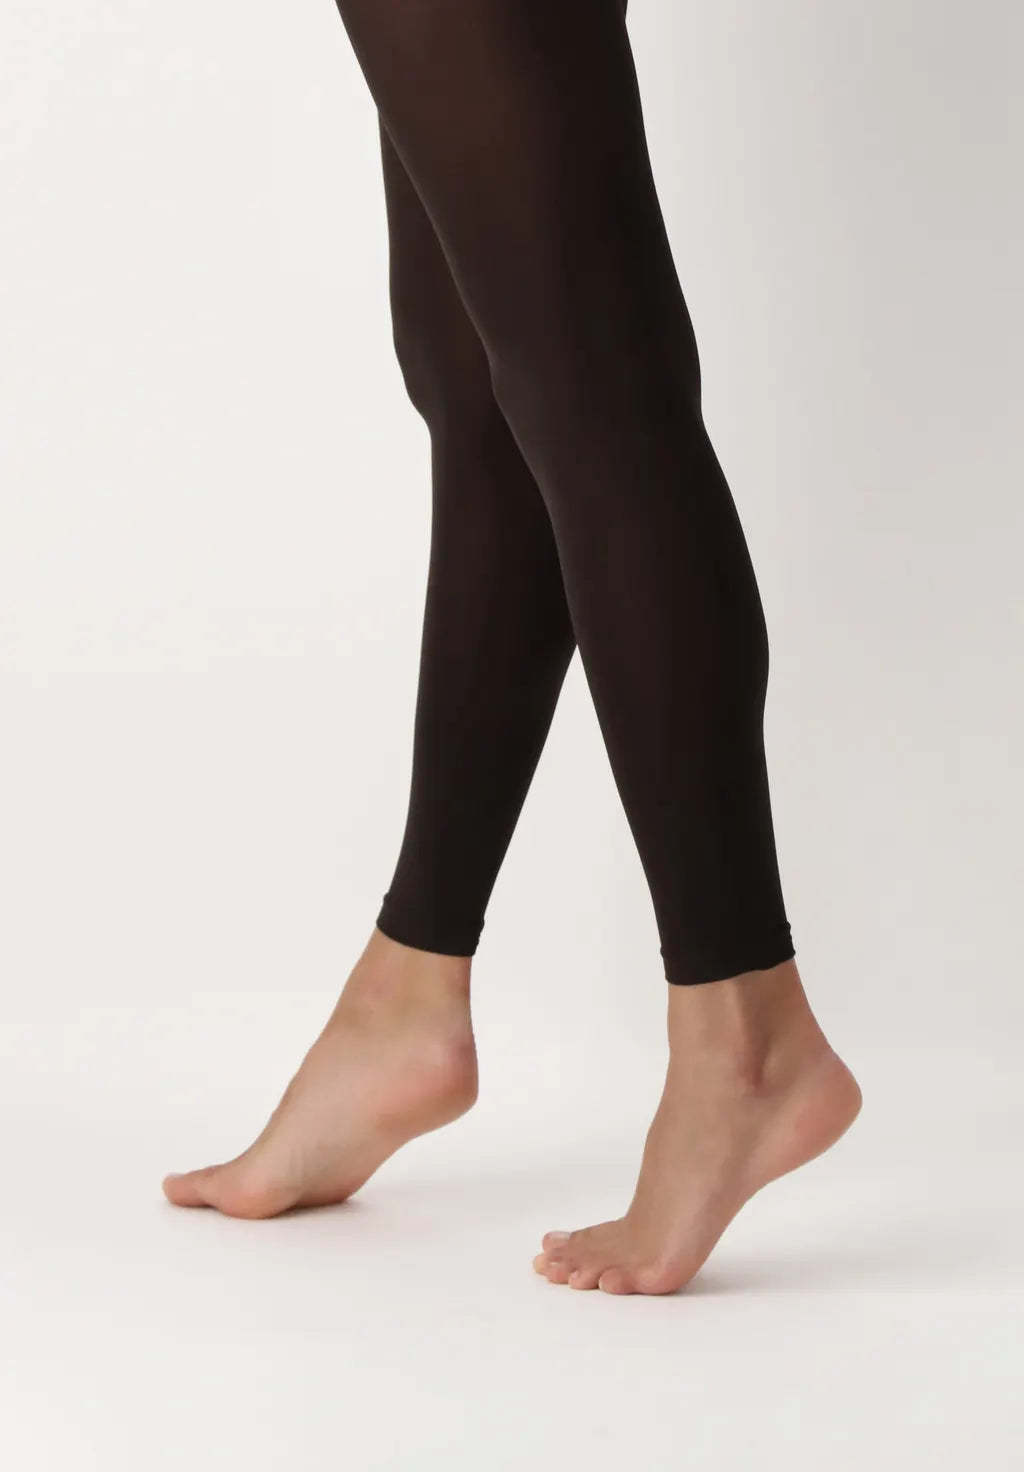 OroblÌ_ All Colors Leggings - Dark brown soft matte opaque footless tights with deep comfort waist band, flat seams and gusset.